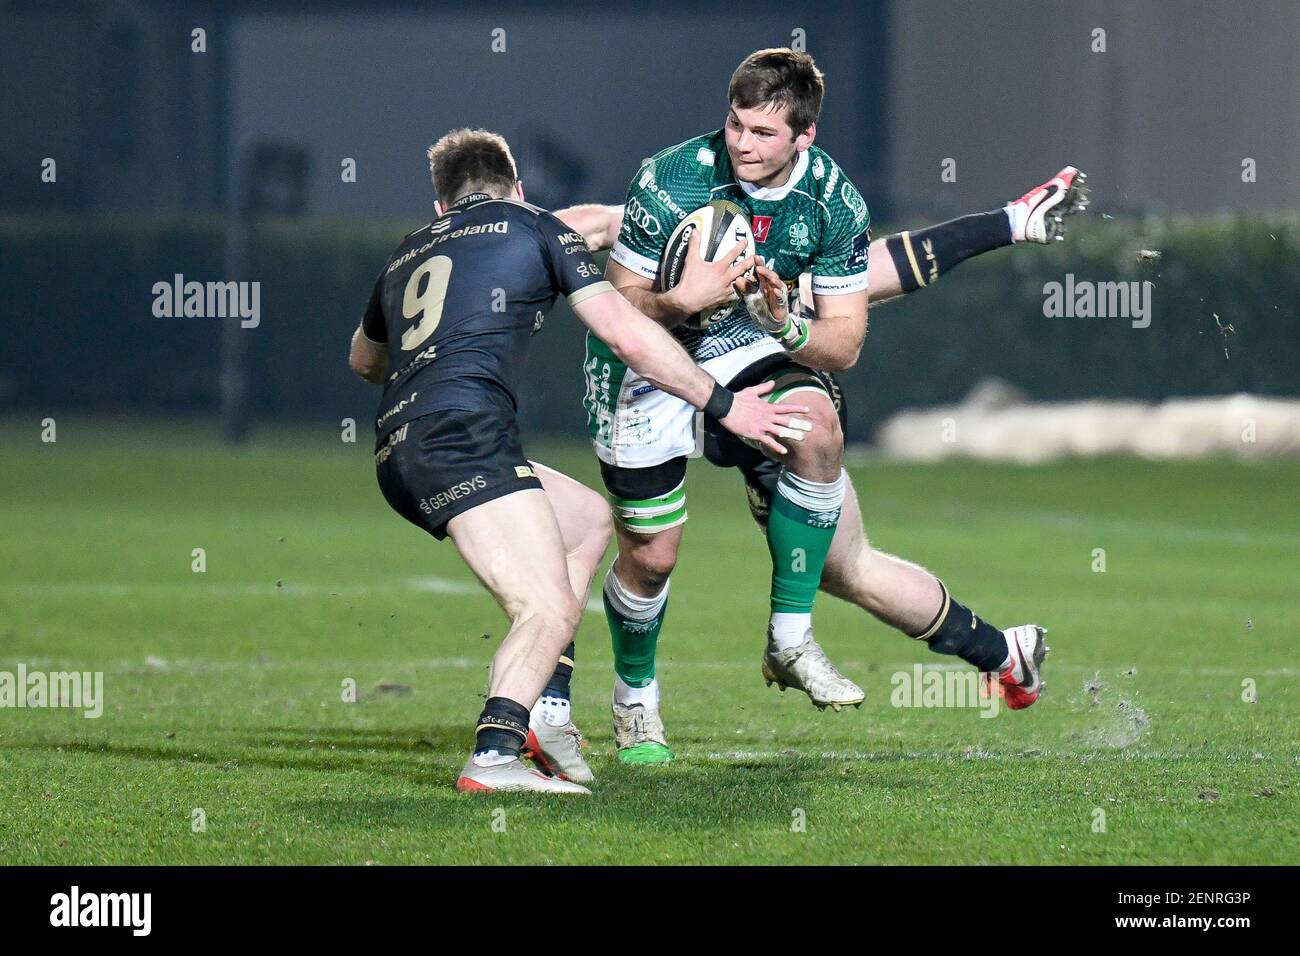 Treviso, Italy. 26th Feb, 2021. Manuel Zuliani (Benetton Treviso) carries  the ball hindered by Kieran Marmion (Connacht) during Benetton Treviso vs  Connacht Rugby, Rugby Guinness Pro 14 match in Treviso, Italy, February